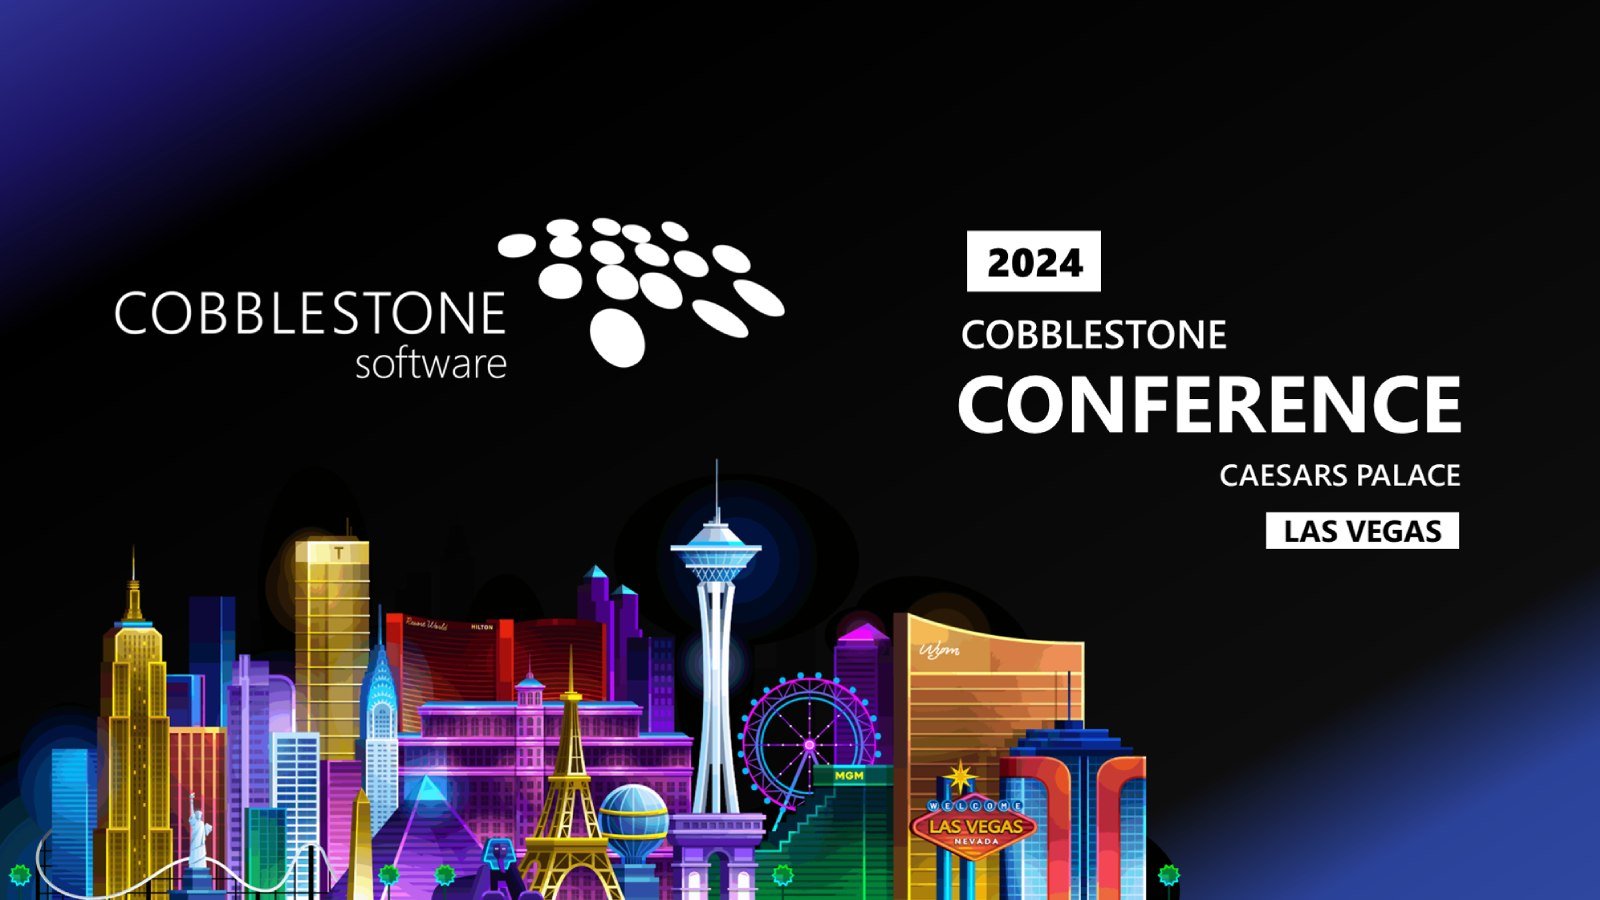 CobbleStone Software is hosting its conference in Las Vegas, Nevada in October of 2024.